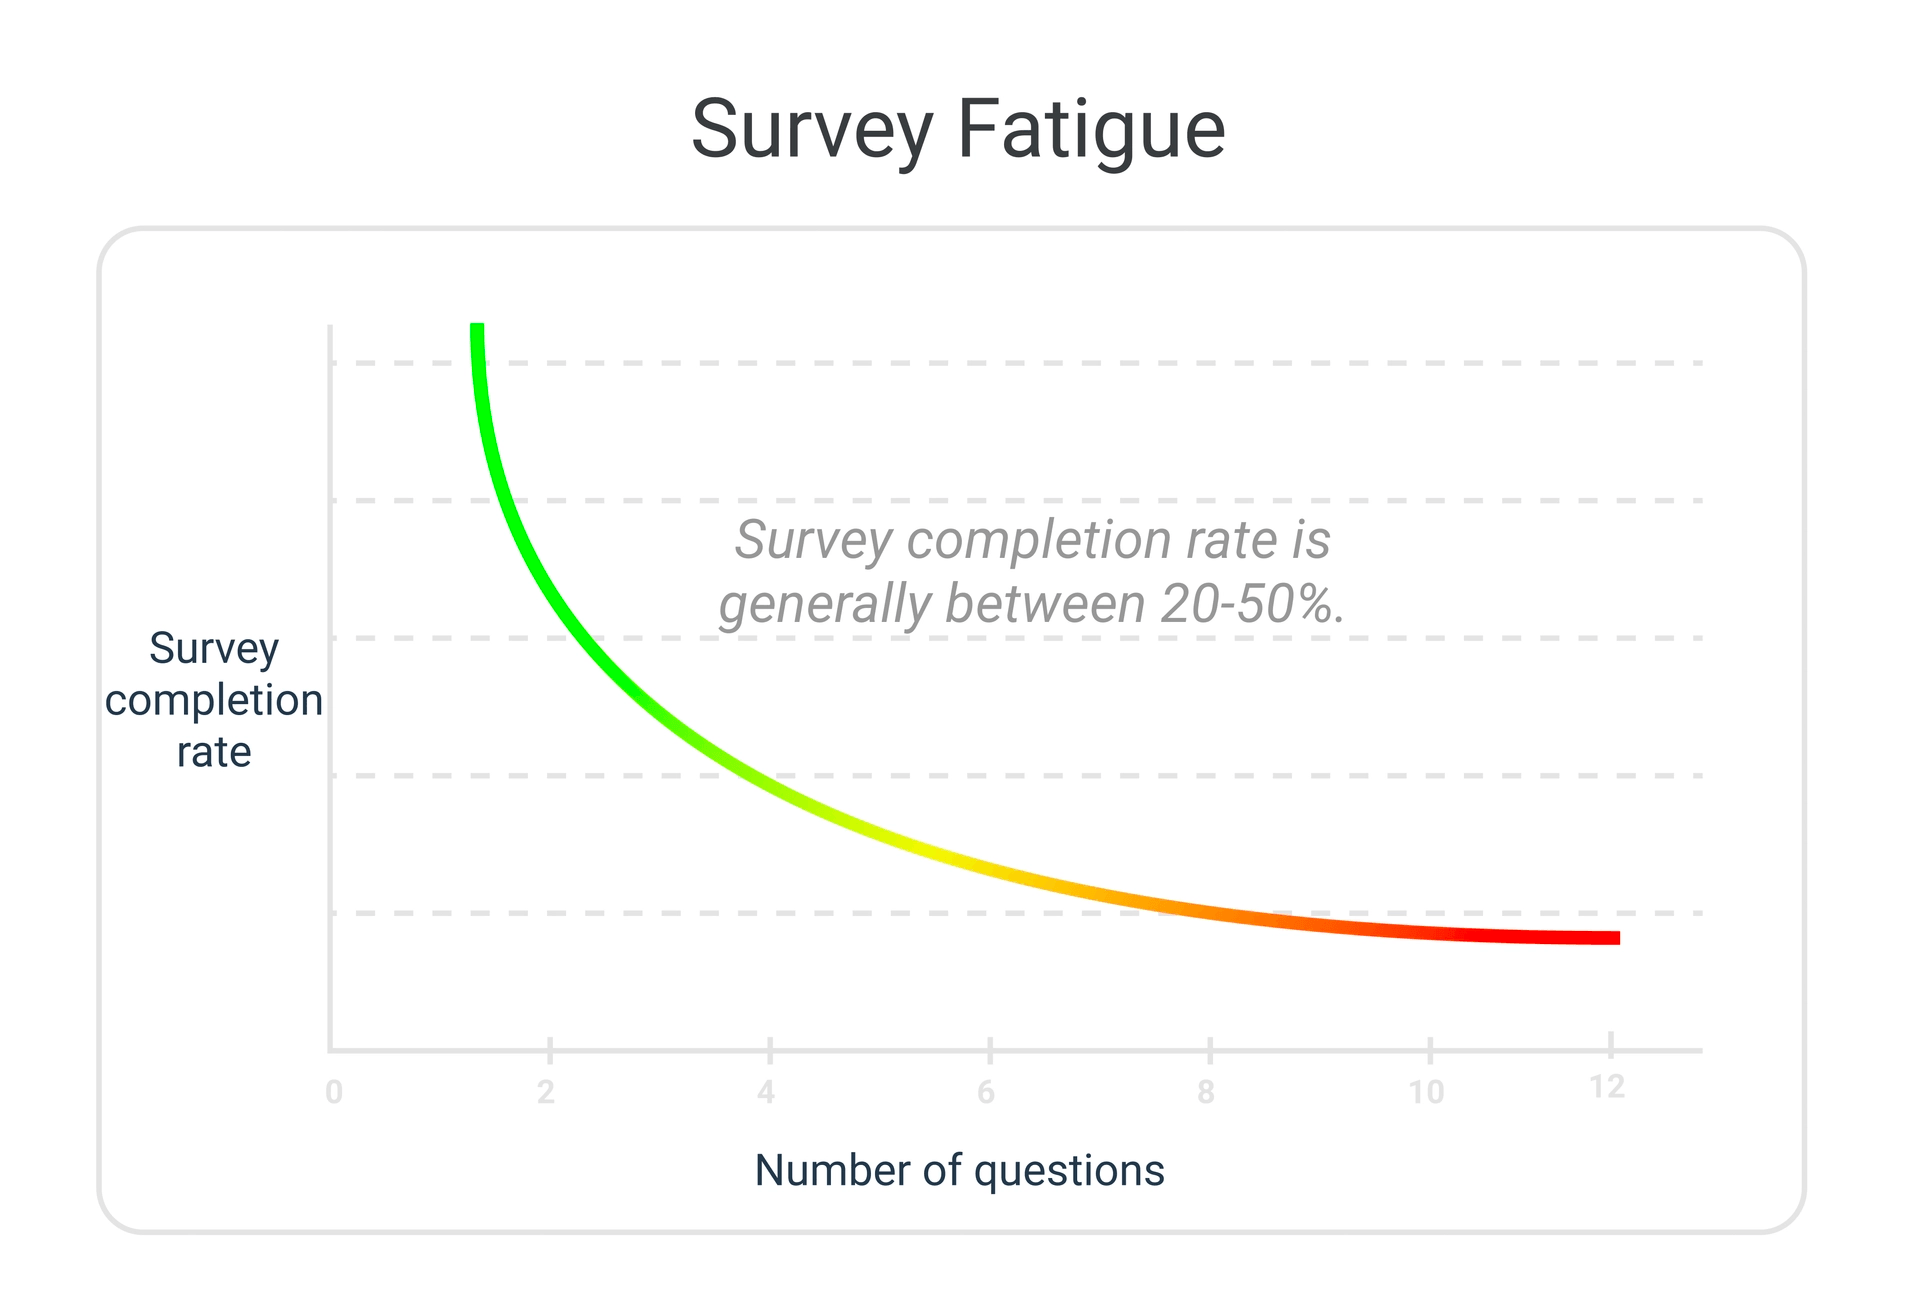 Survey fatigue axis. Survey completion rate vs number of questions. Completion trends down when question number is high.